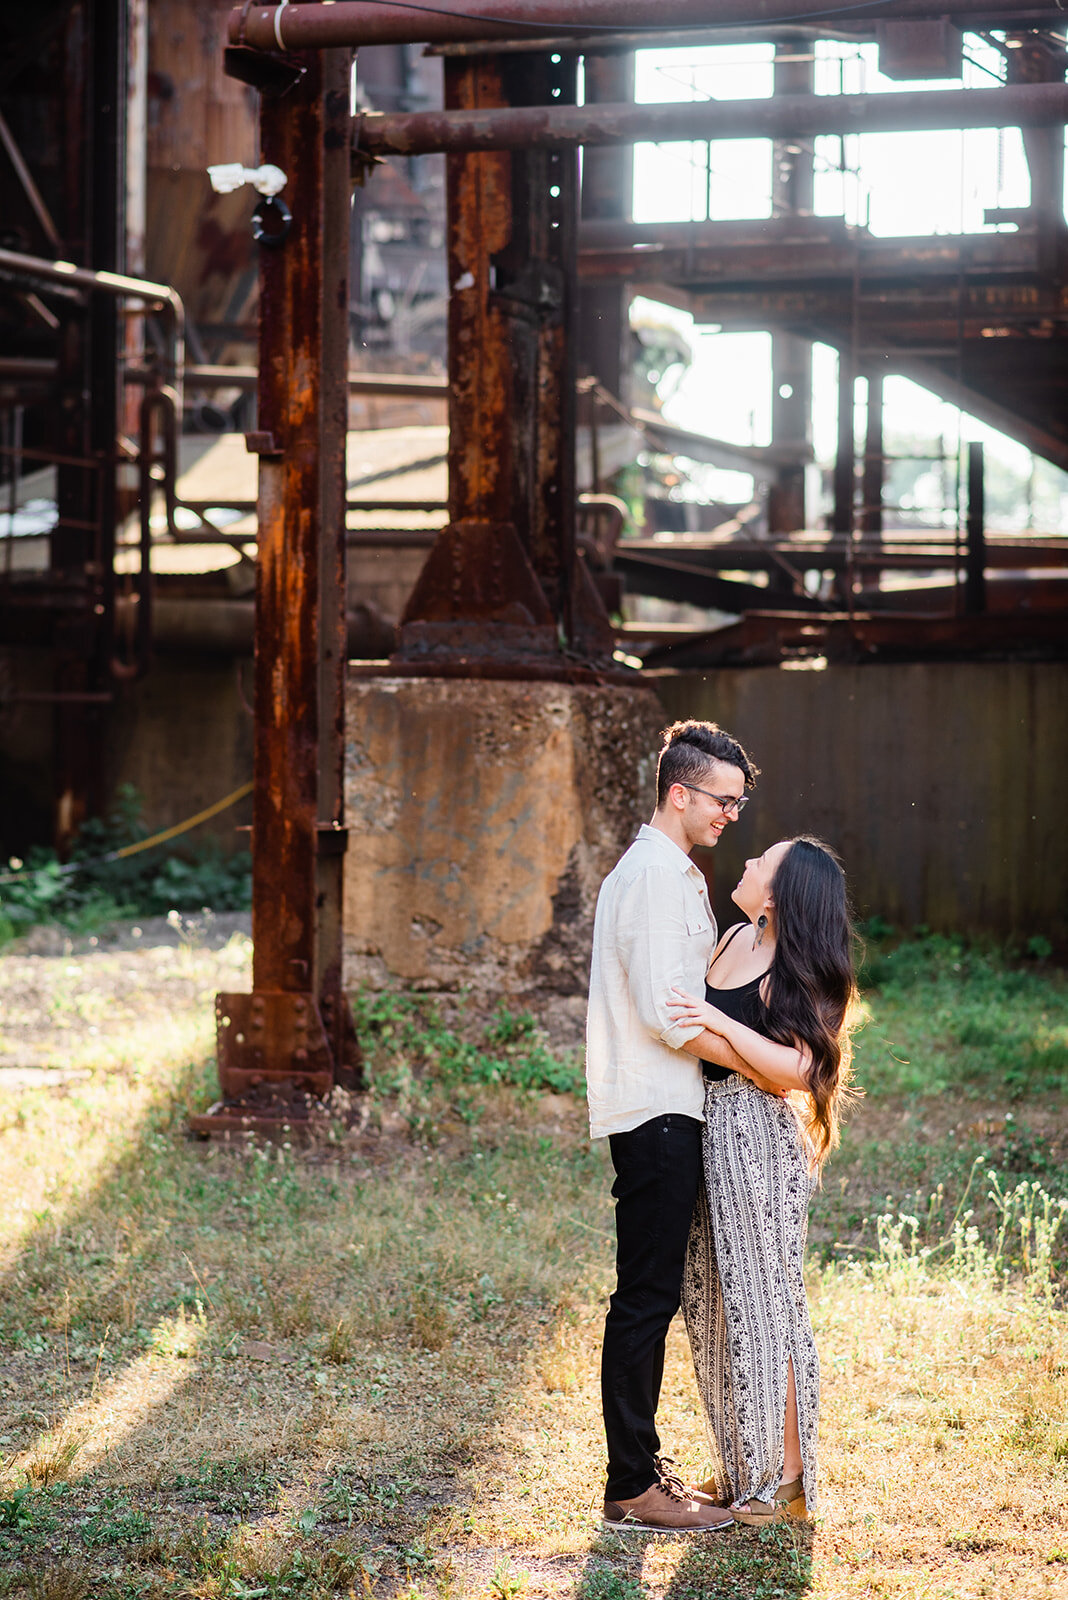 carrie furnace portrait proposal pittsburgh